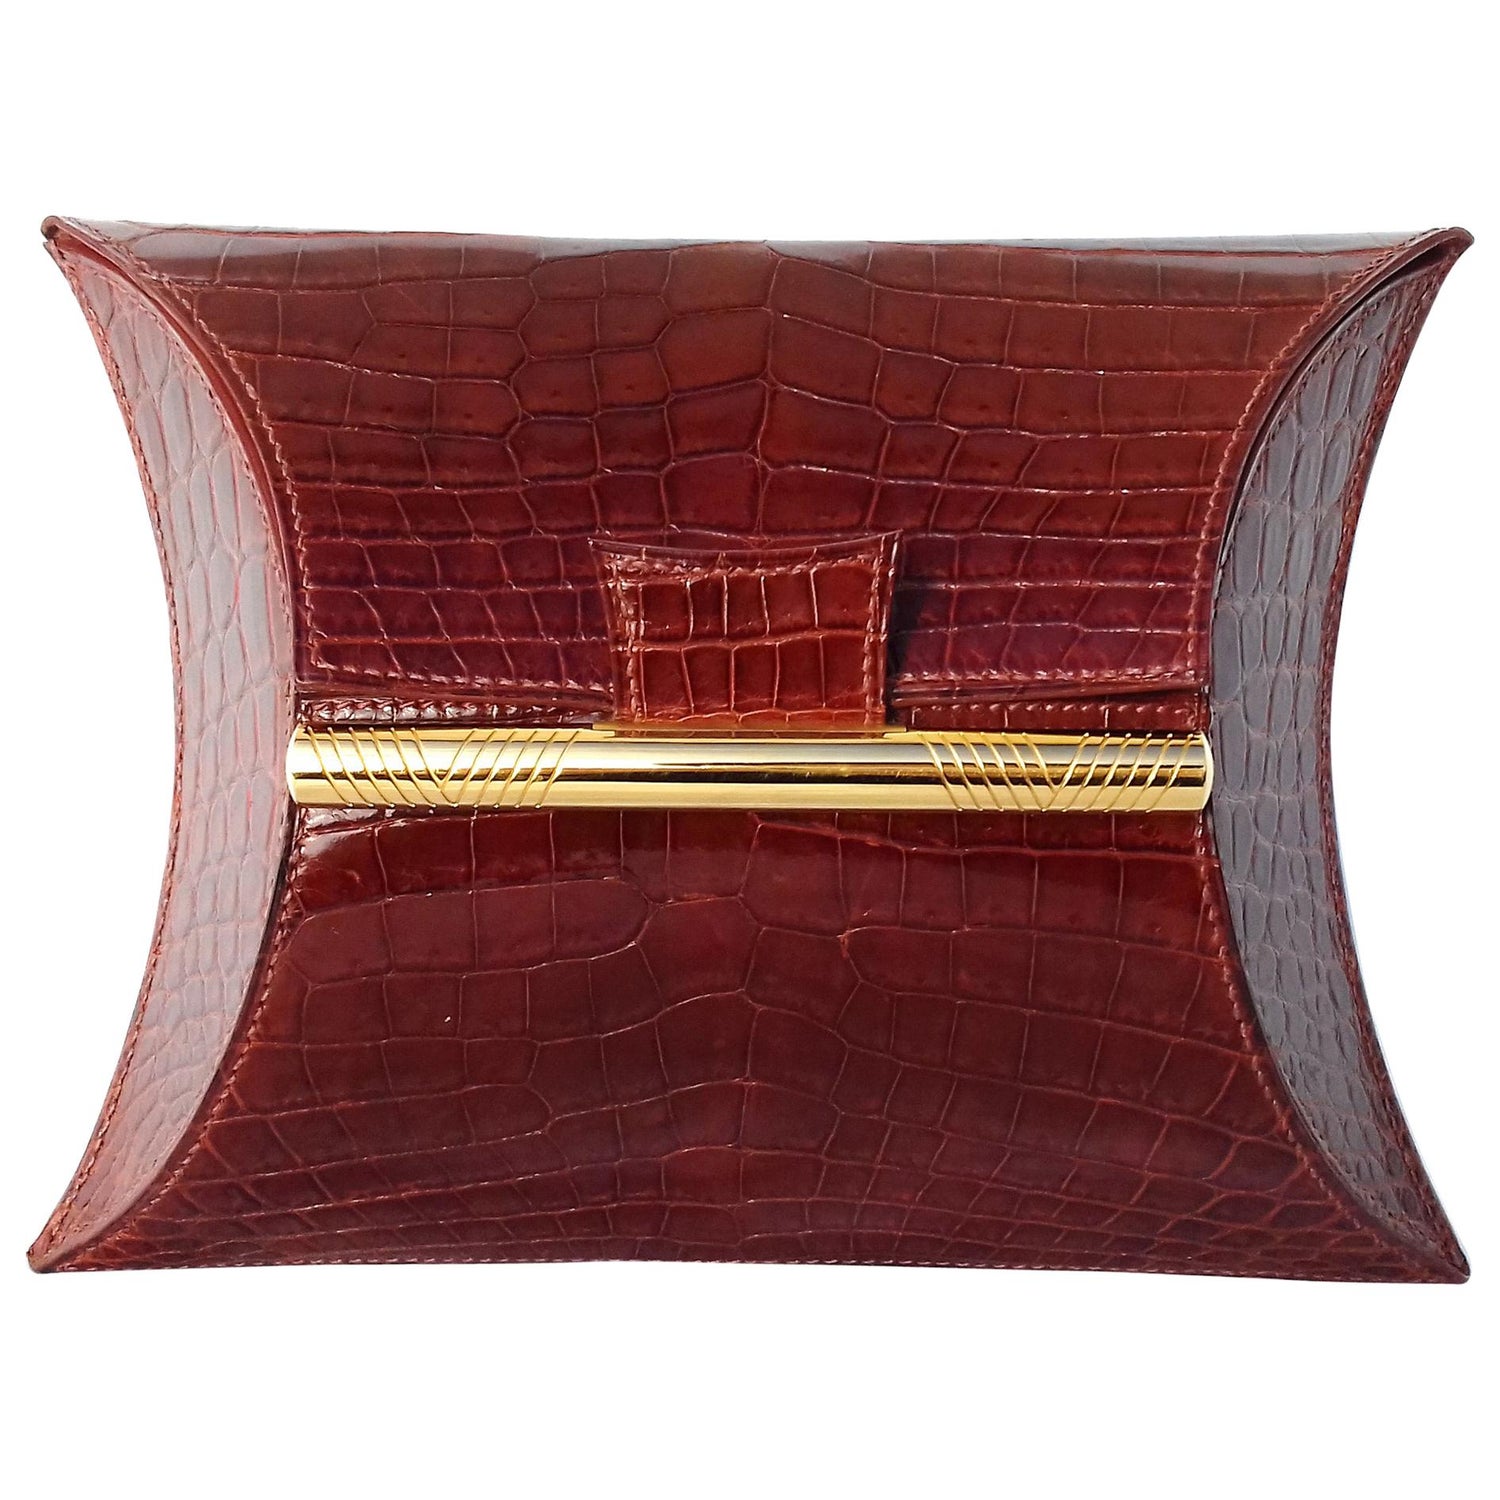 Rare Hermès Kelly Clutches for the Dedicated Collector